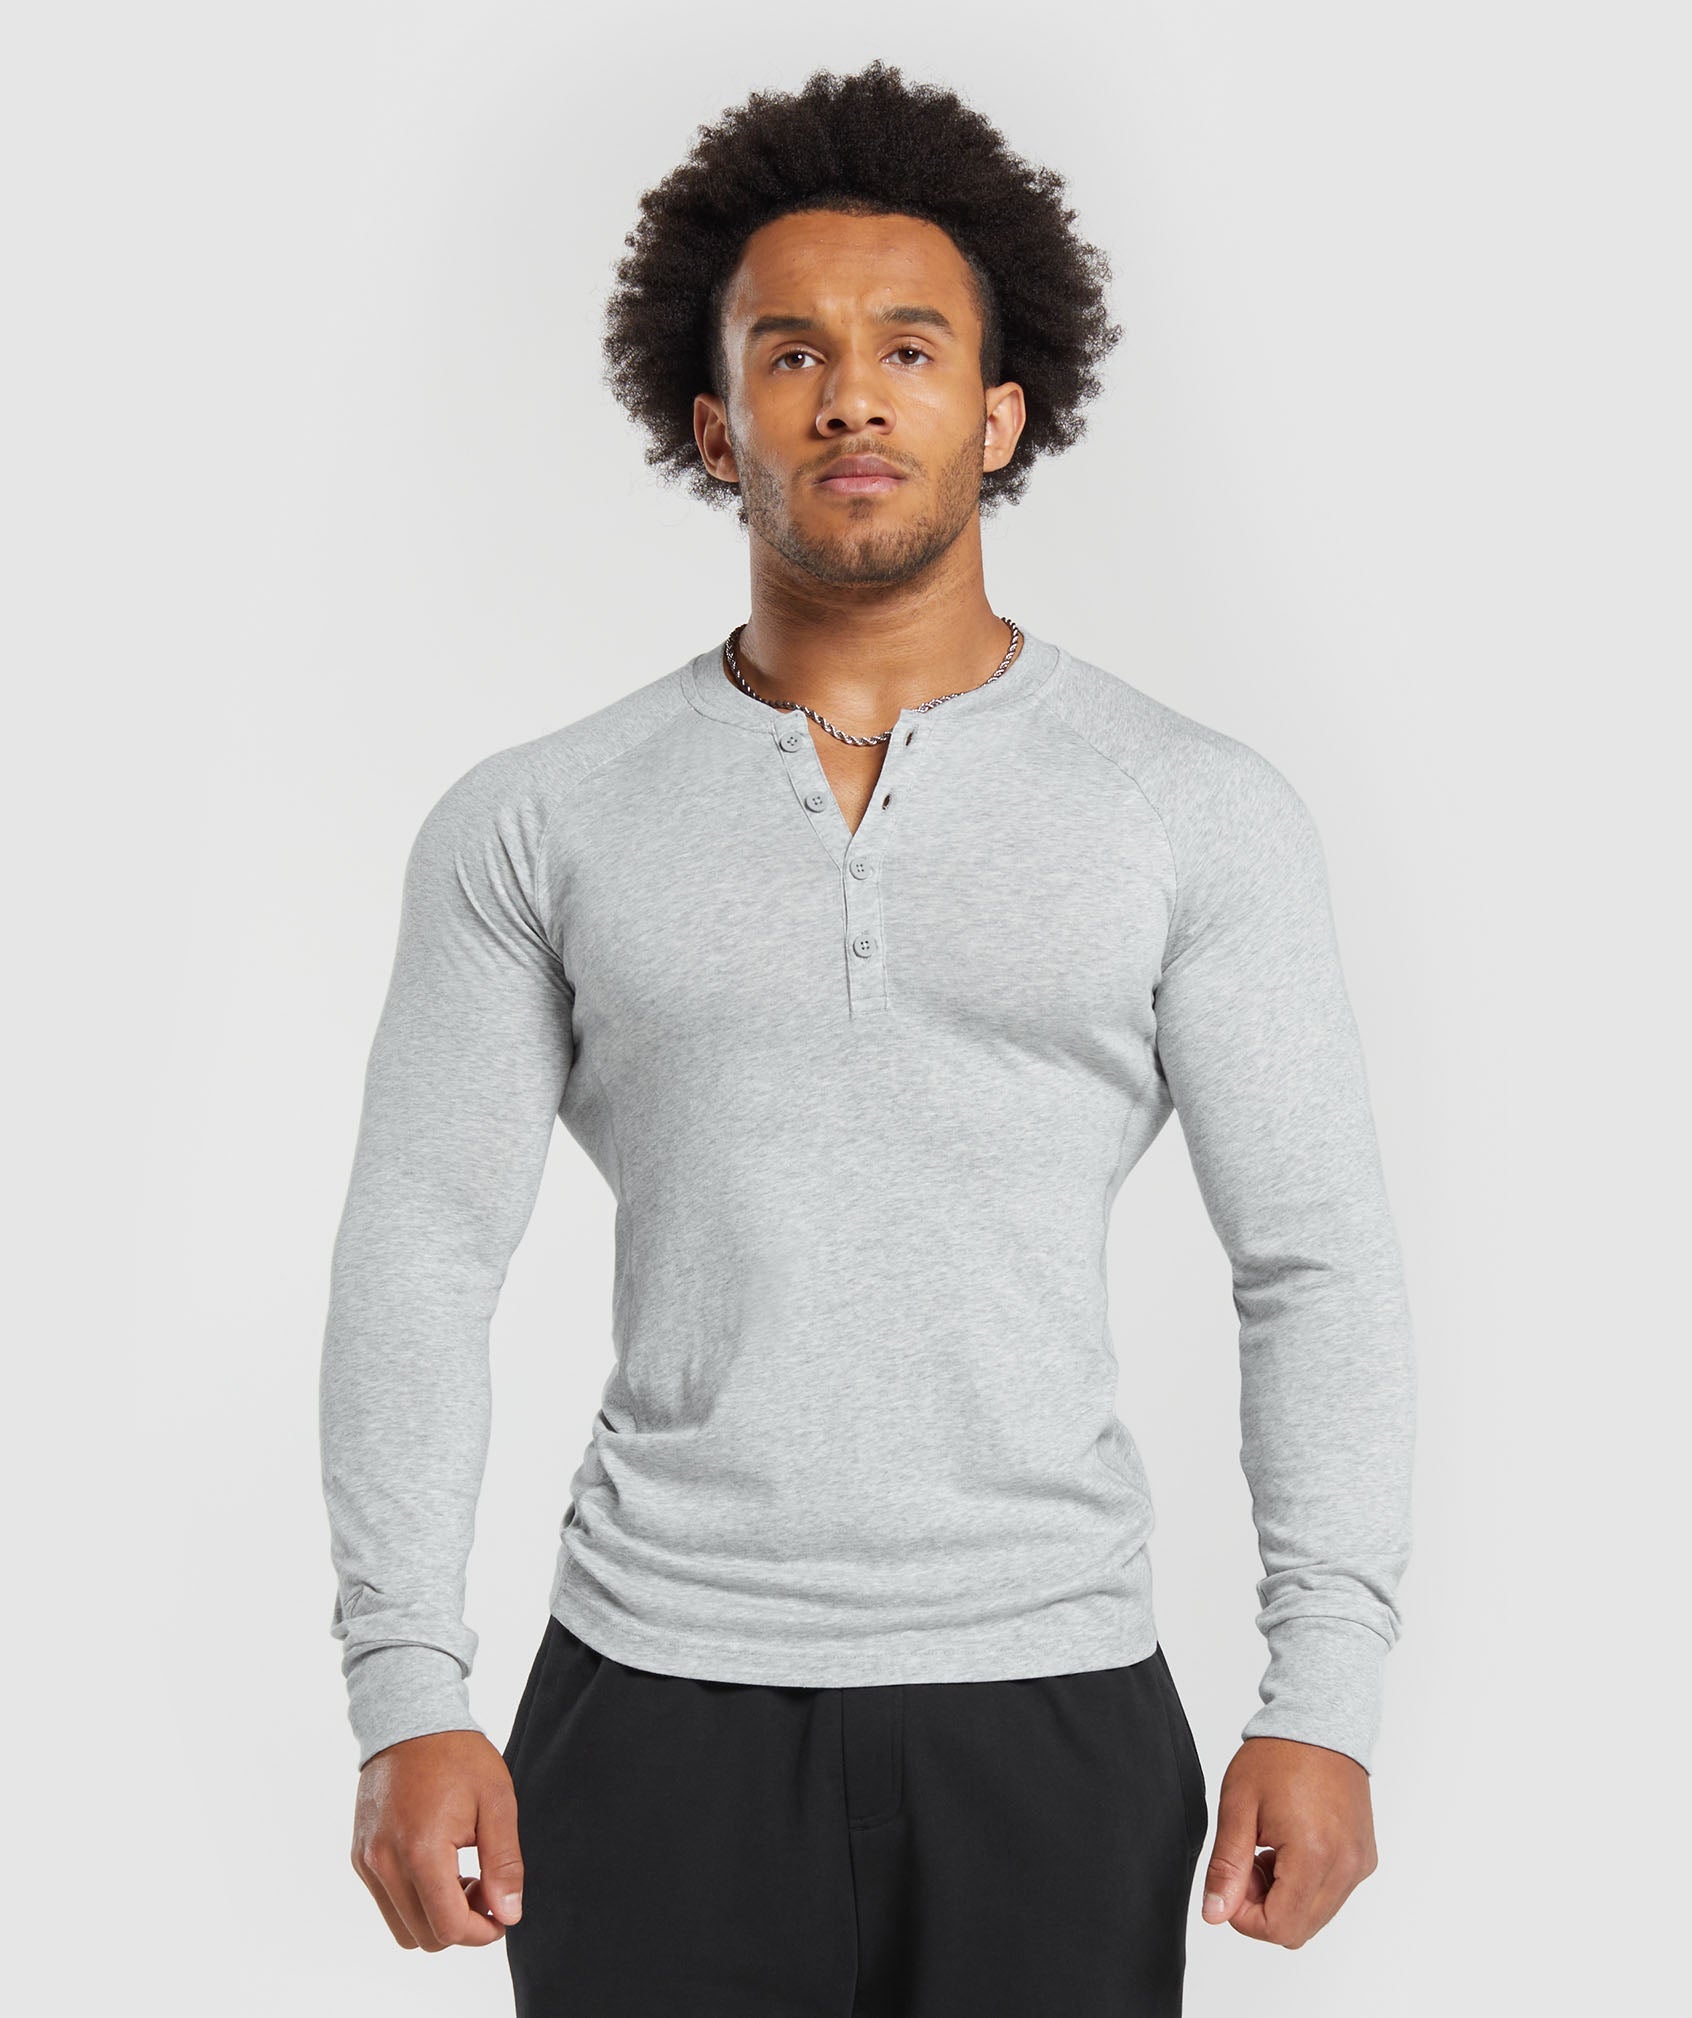 Mens Casual Long Sleeve Henley Shirt - Classic Lightweight Slim Fit Basic  Cotton Shirts Athletic Workout Button Pullover Tops